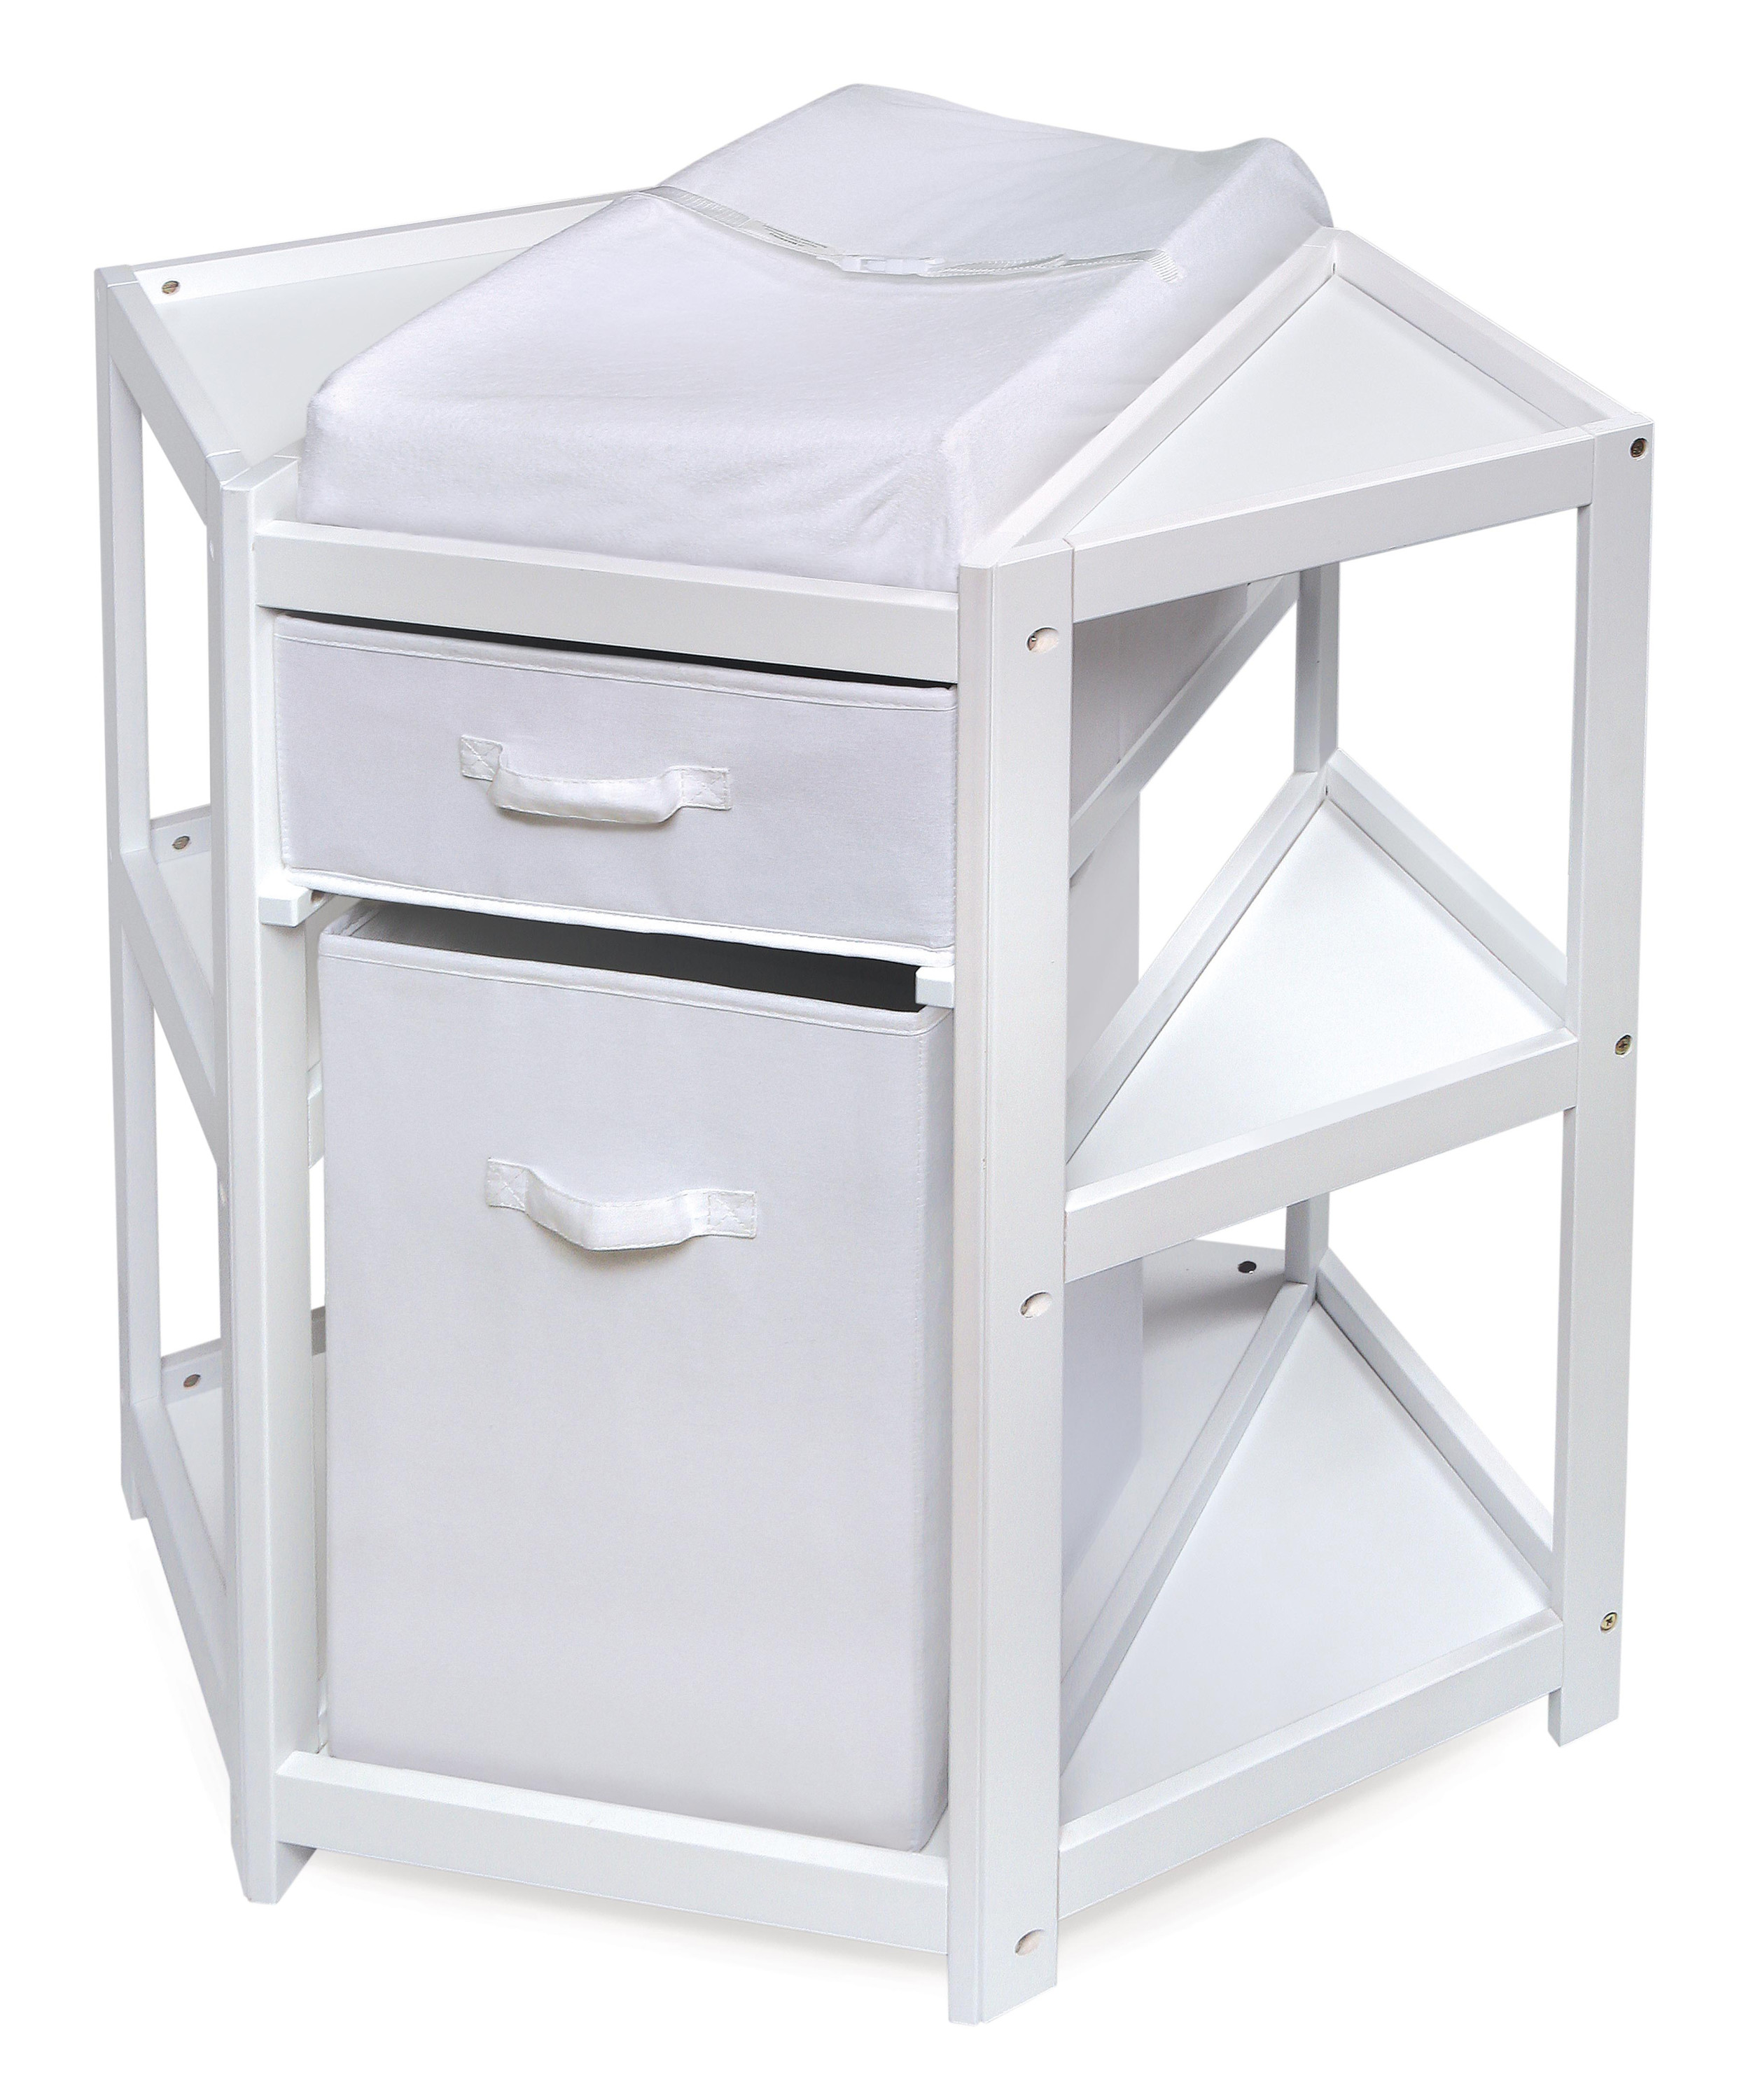 Badger Basket Diaper Corner Baby Changing Table with Hamper and Basket - White - image 1 of 9